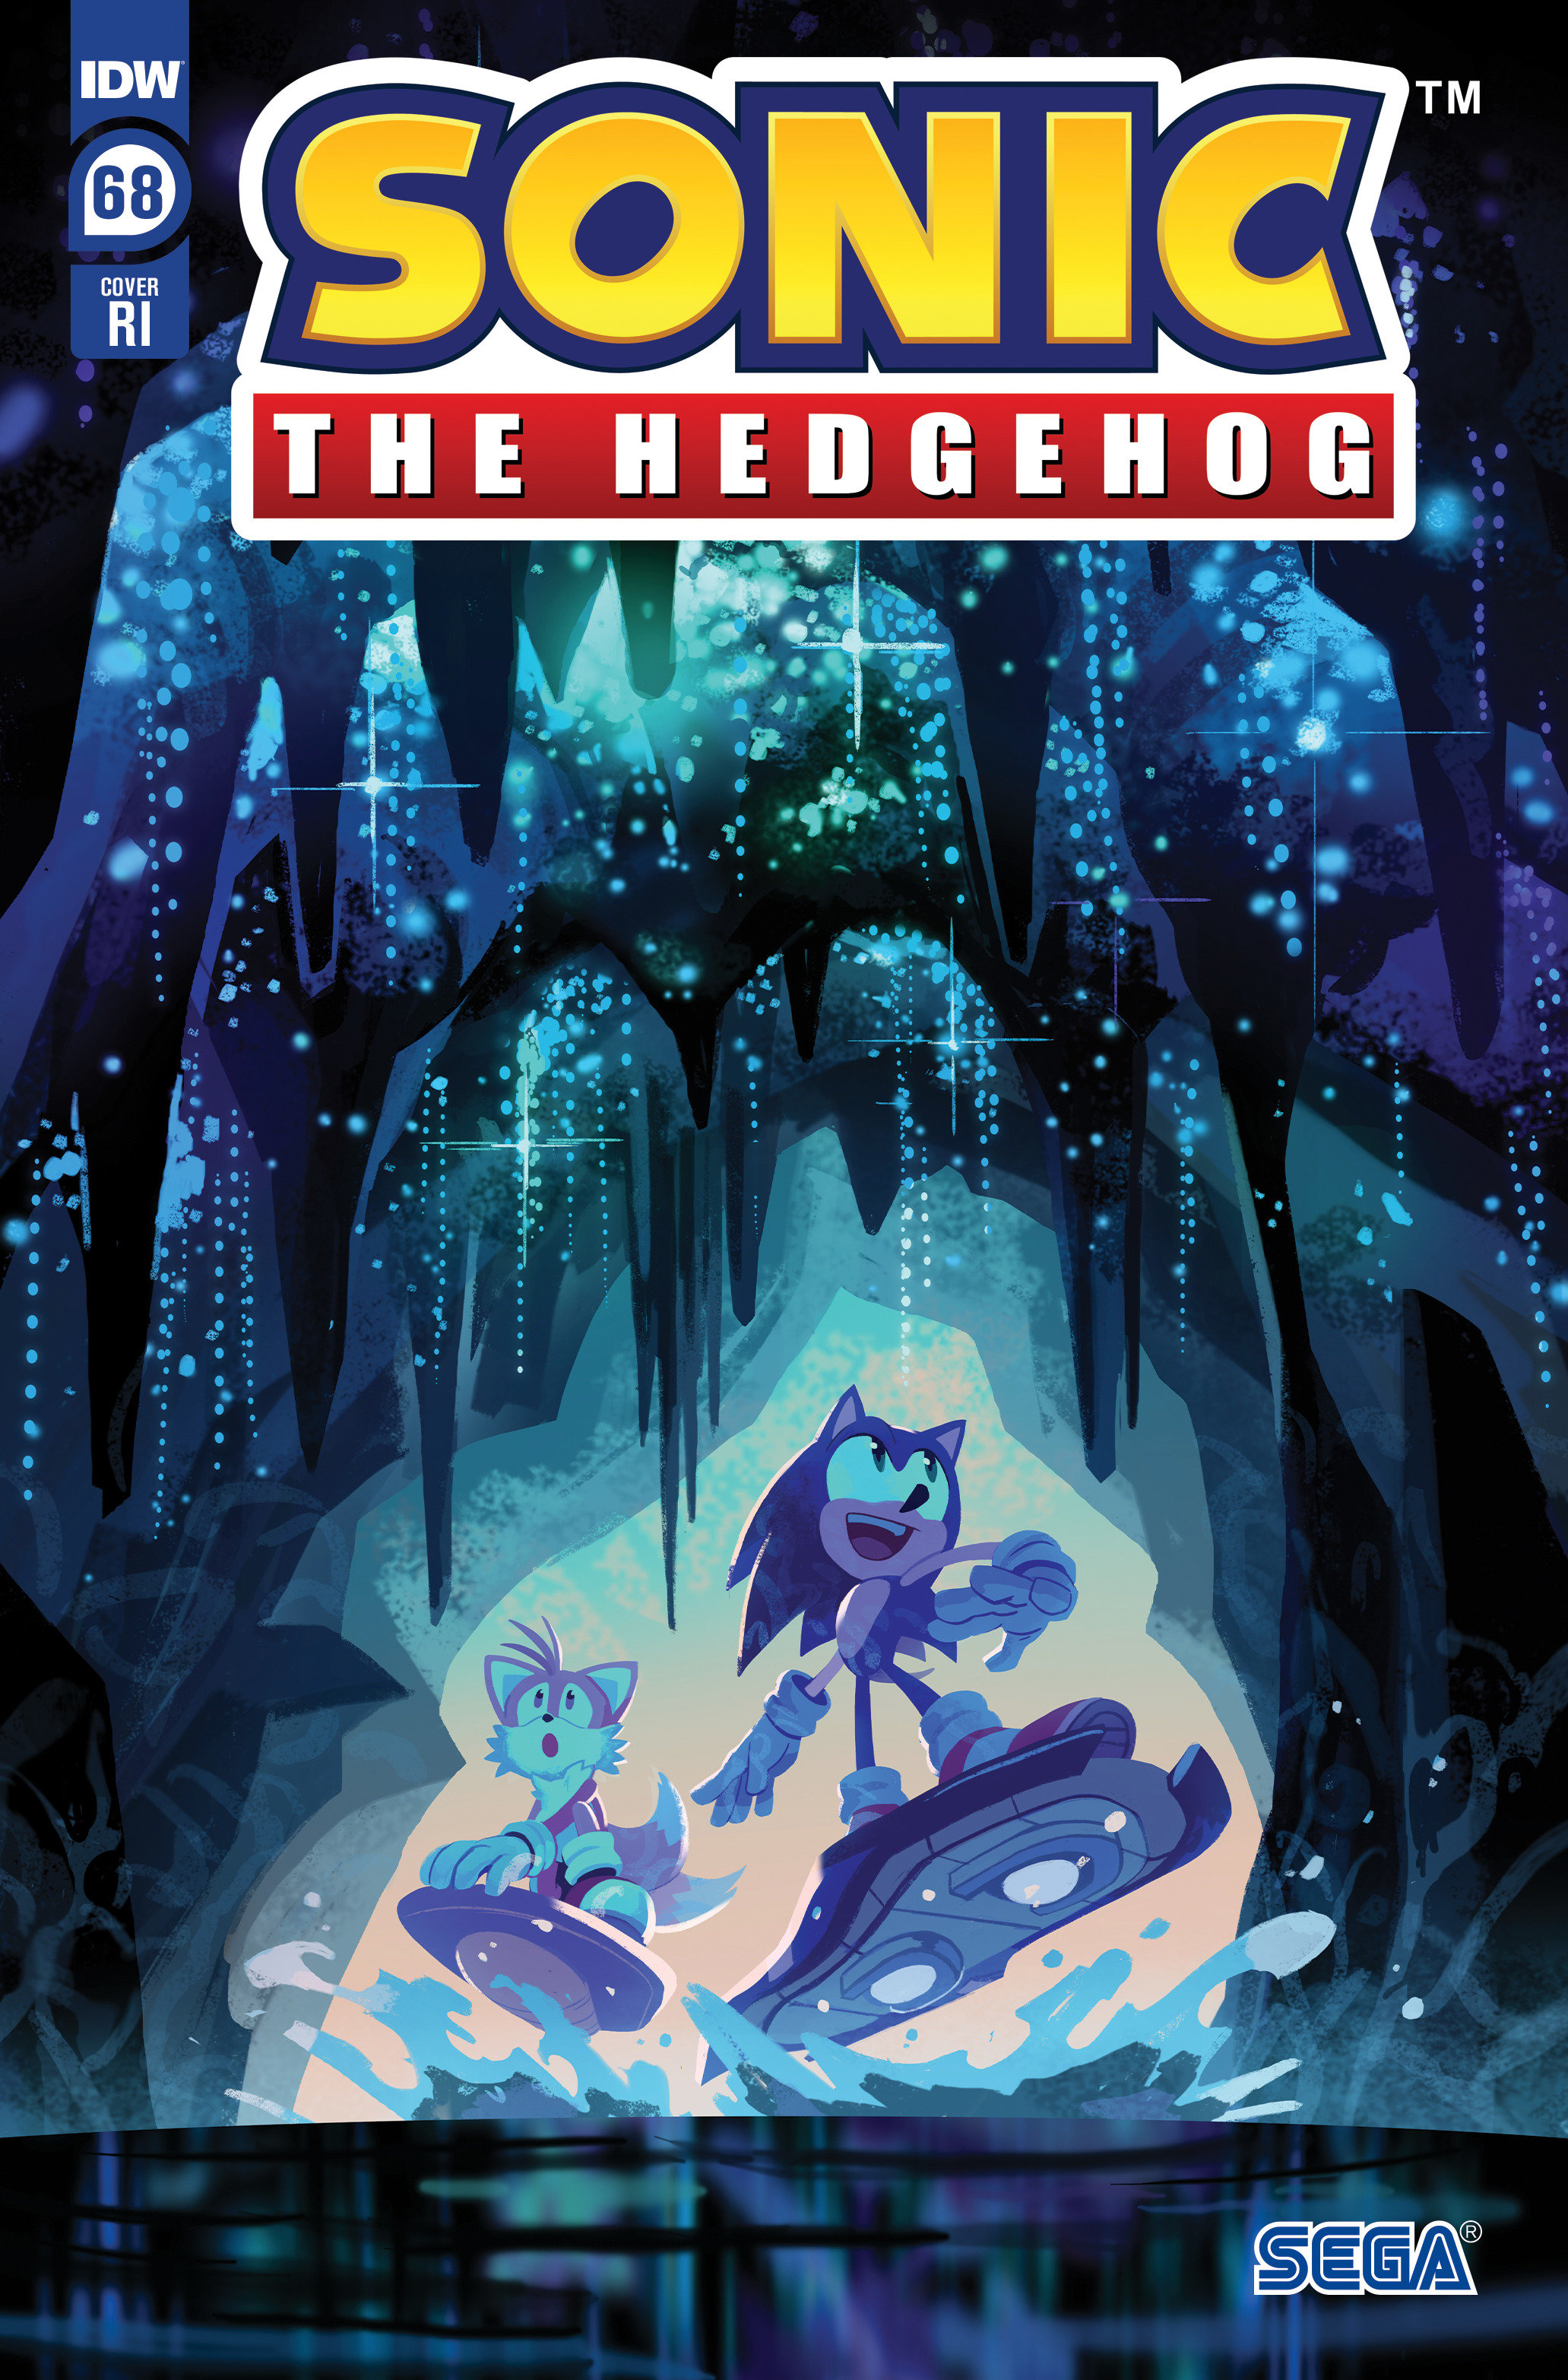 Sonic the Hedgehog #68 Cover Fourdraine 1 for 10 Incentive